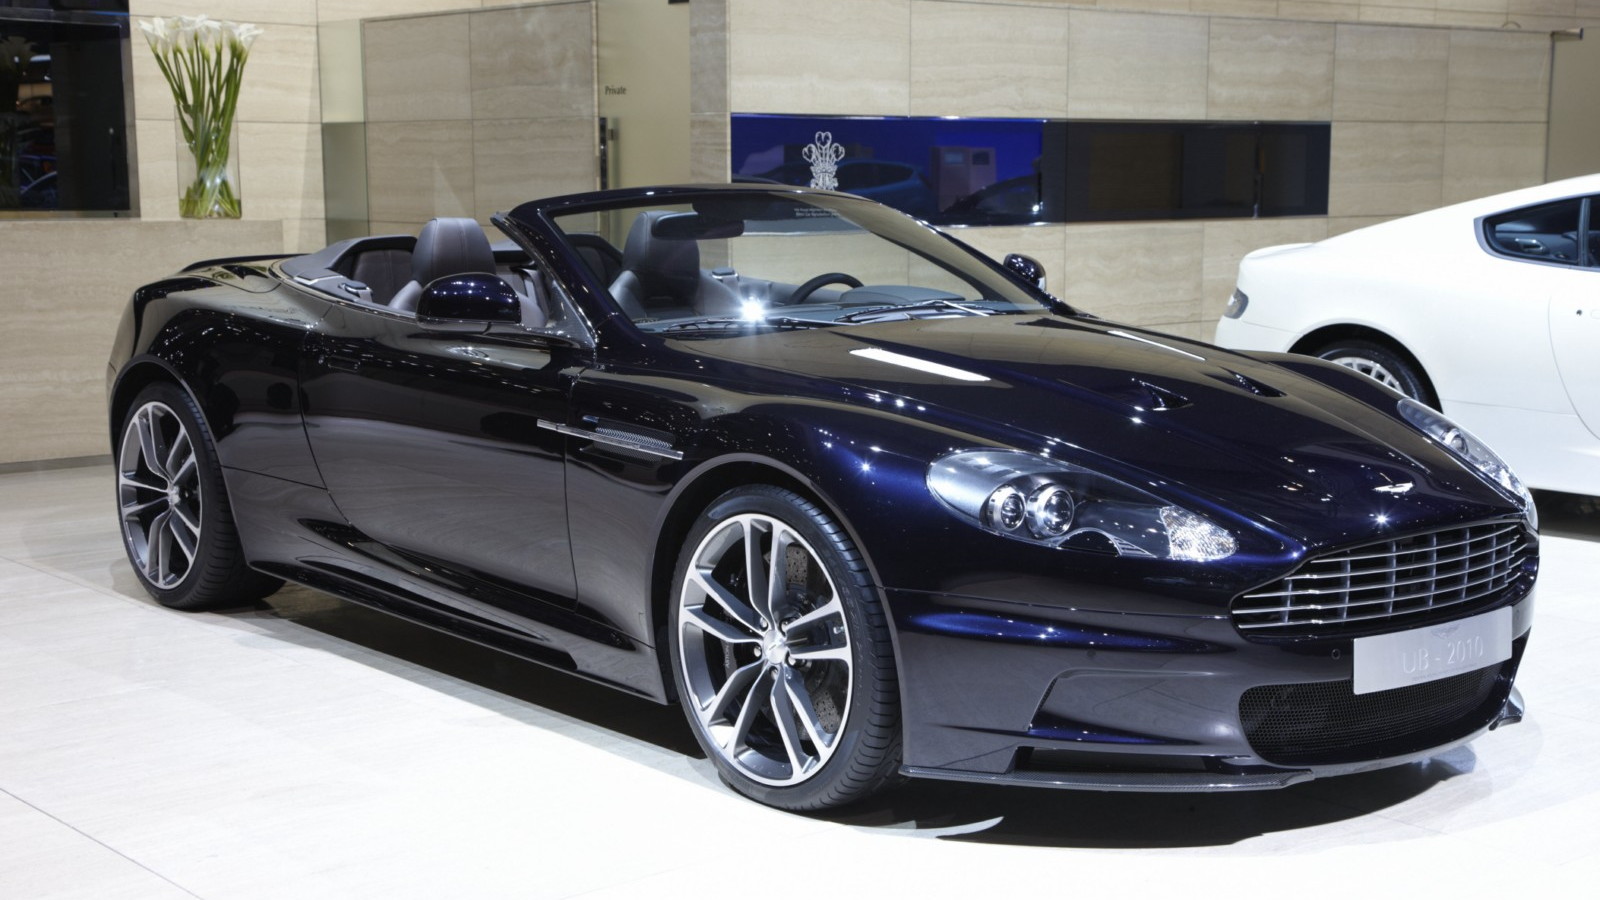 Aston Martin UB-2010 and Works Service Tailored at the 2010 Geneva Motor Show.